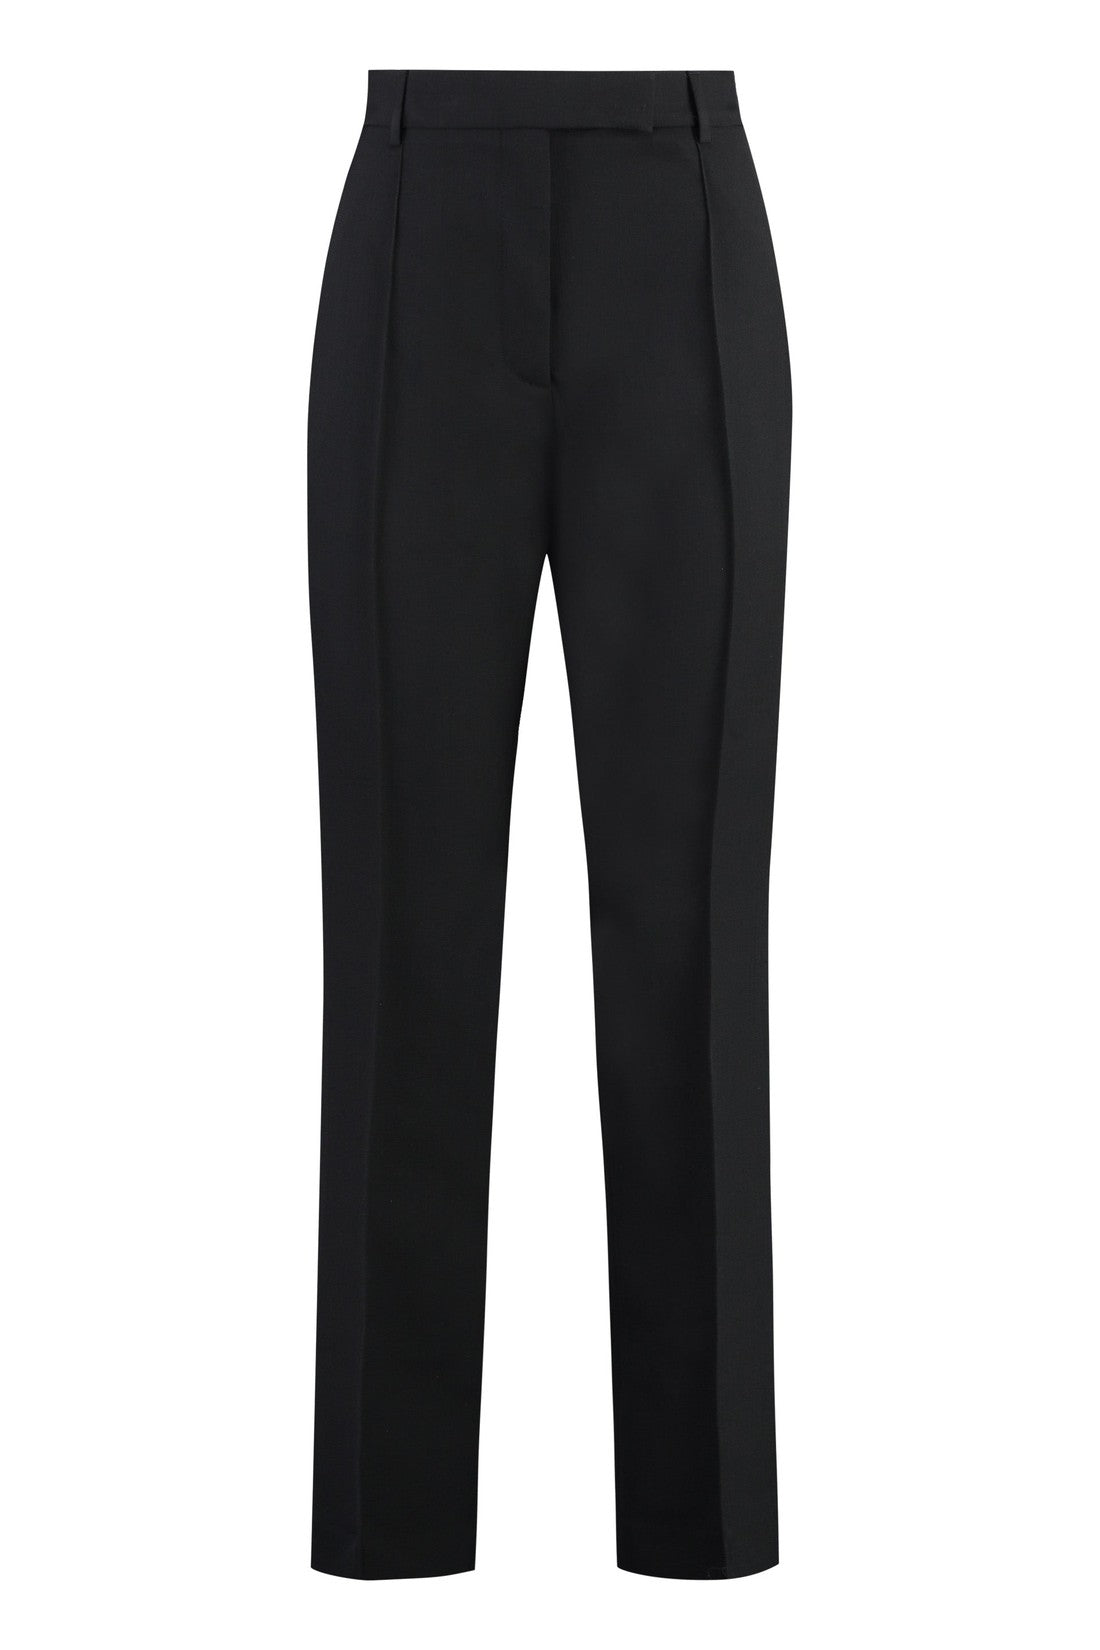 Acne Studios-OUTLET-SALE-Wool blend tailored trousers-ARCHIVIST